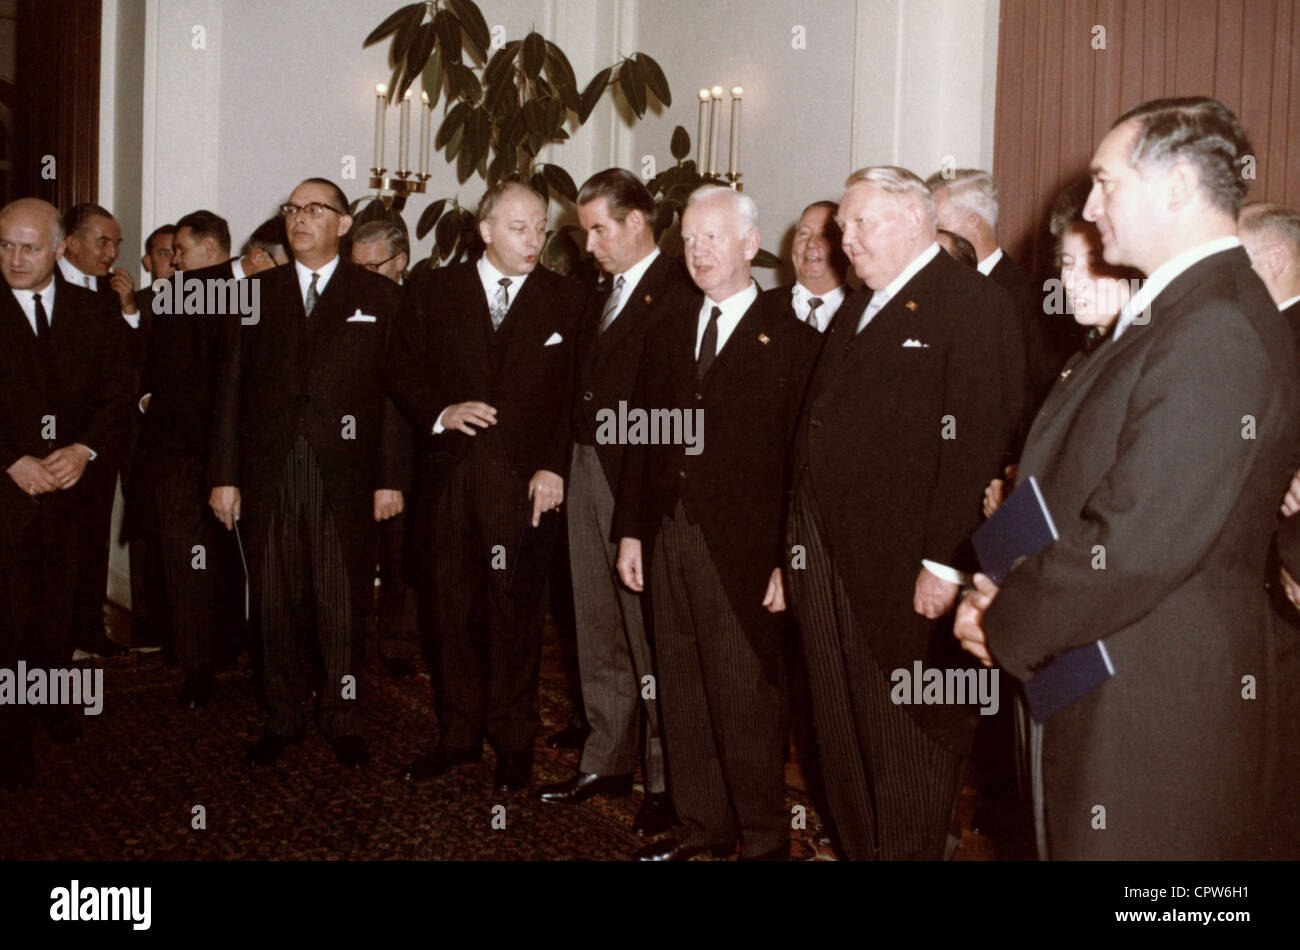 Erhard, Ludwig, 4.2.1897 - 5.5.1977, German politician (CDU), Chancellor of the Federal Republic of Germany, with his cabinet at the office of the President of Germany, Heinrich Luebke, Bonn, 17.10.1963, Stock Photo